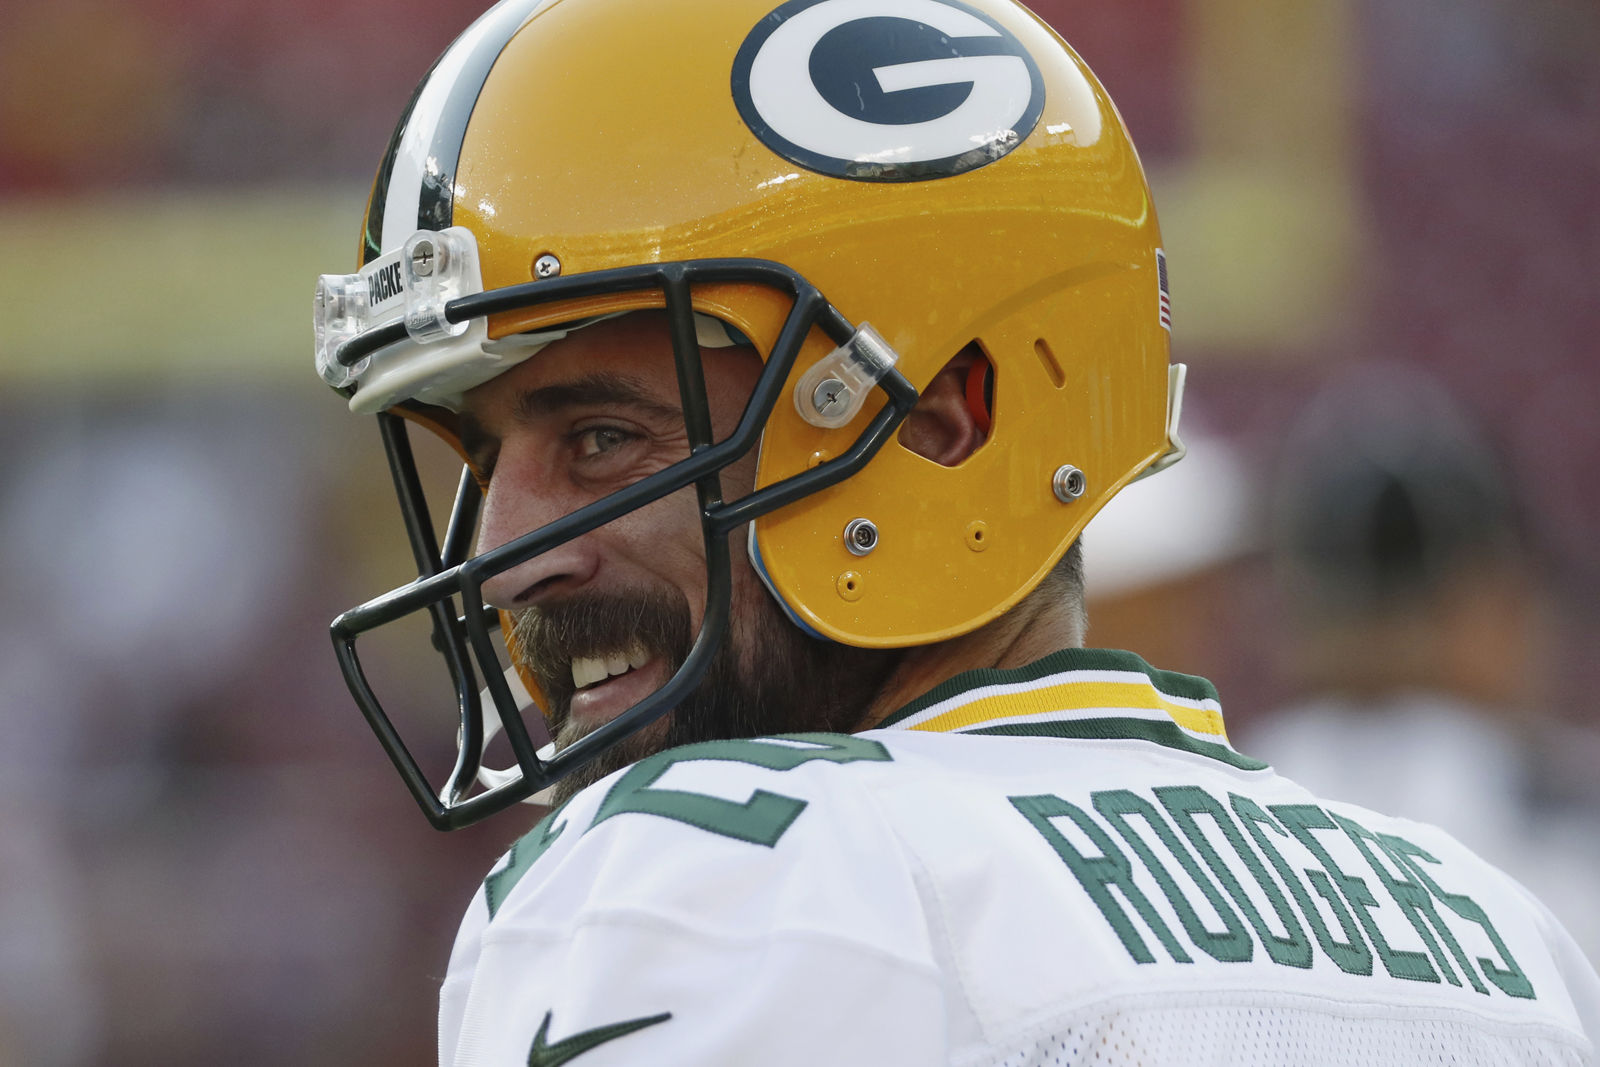 Green Bay Packers quarterback Aaron Rodgers (12) warms up before an NFL preseason football game against the Washington Redskins in Landover, Md., Saturday, Aug. 19, 2017. (AP Photo/Alex Brandon)